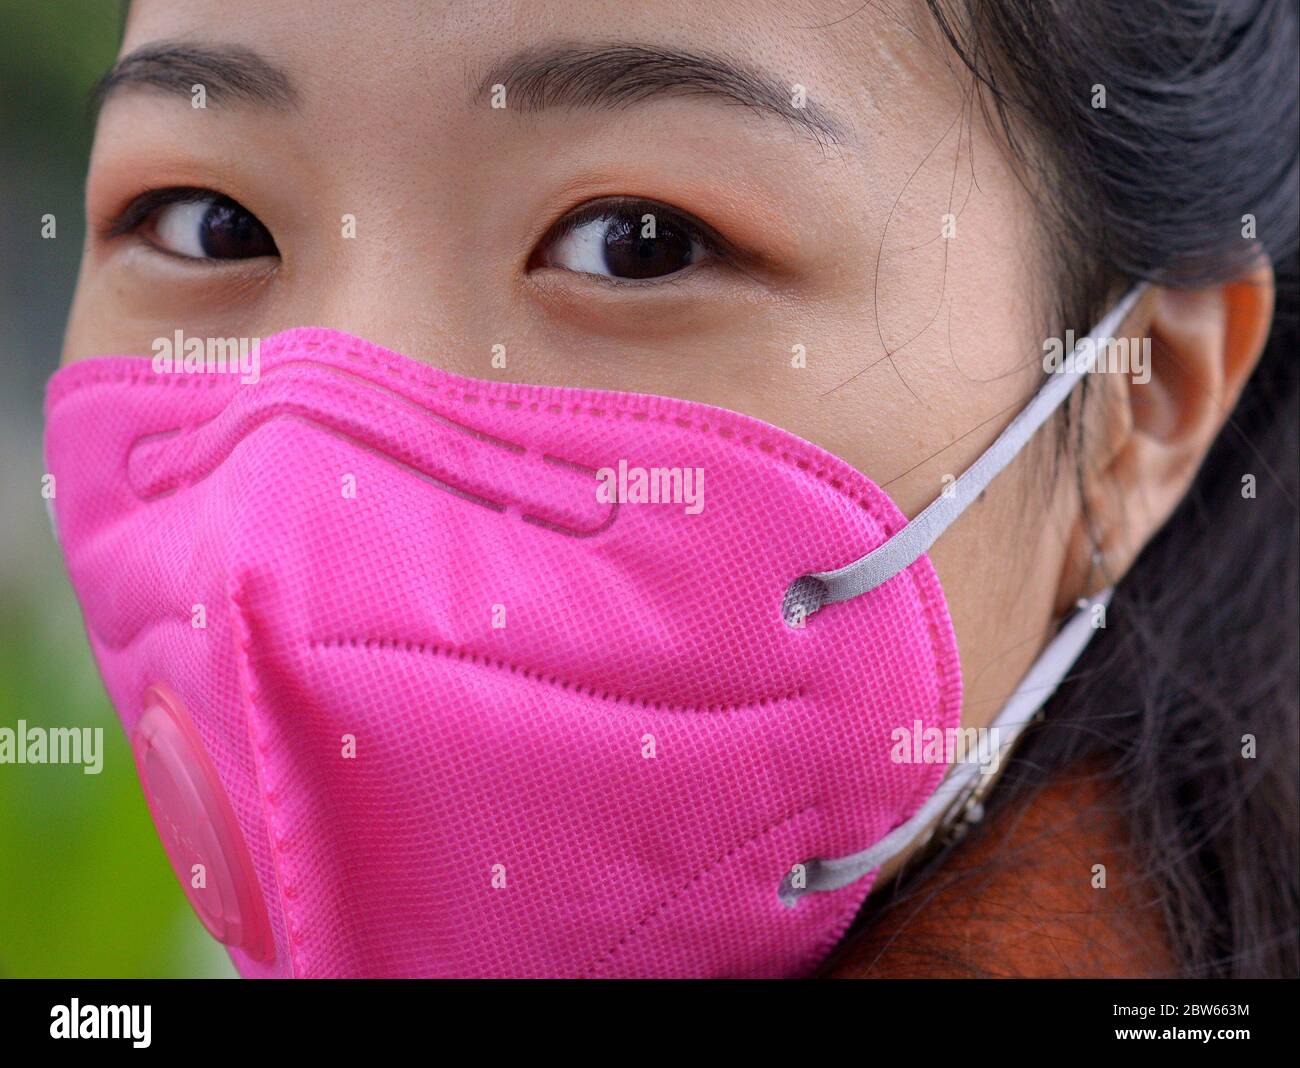 Young Vietnamese woman wears a pink ear loop face mask with breathing valve during the 2019/20 corona virus pandemic. Stock Photo